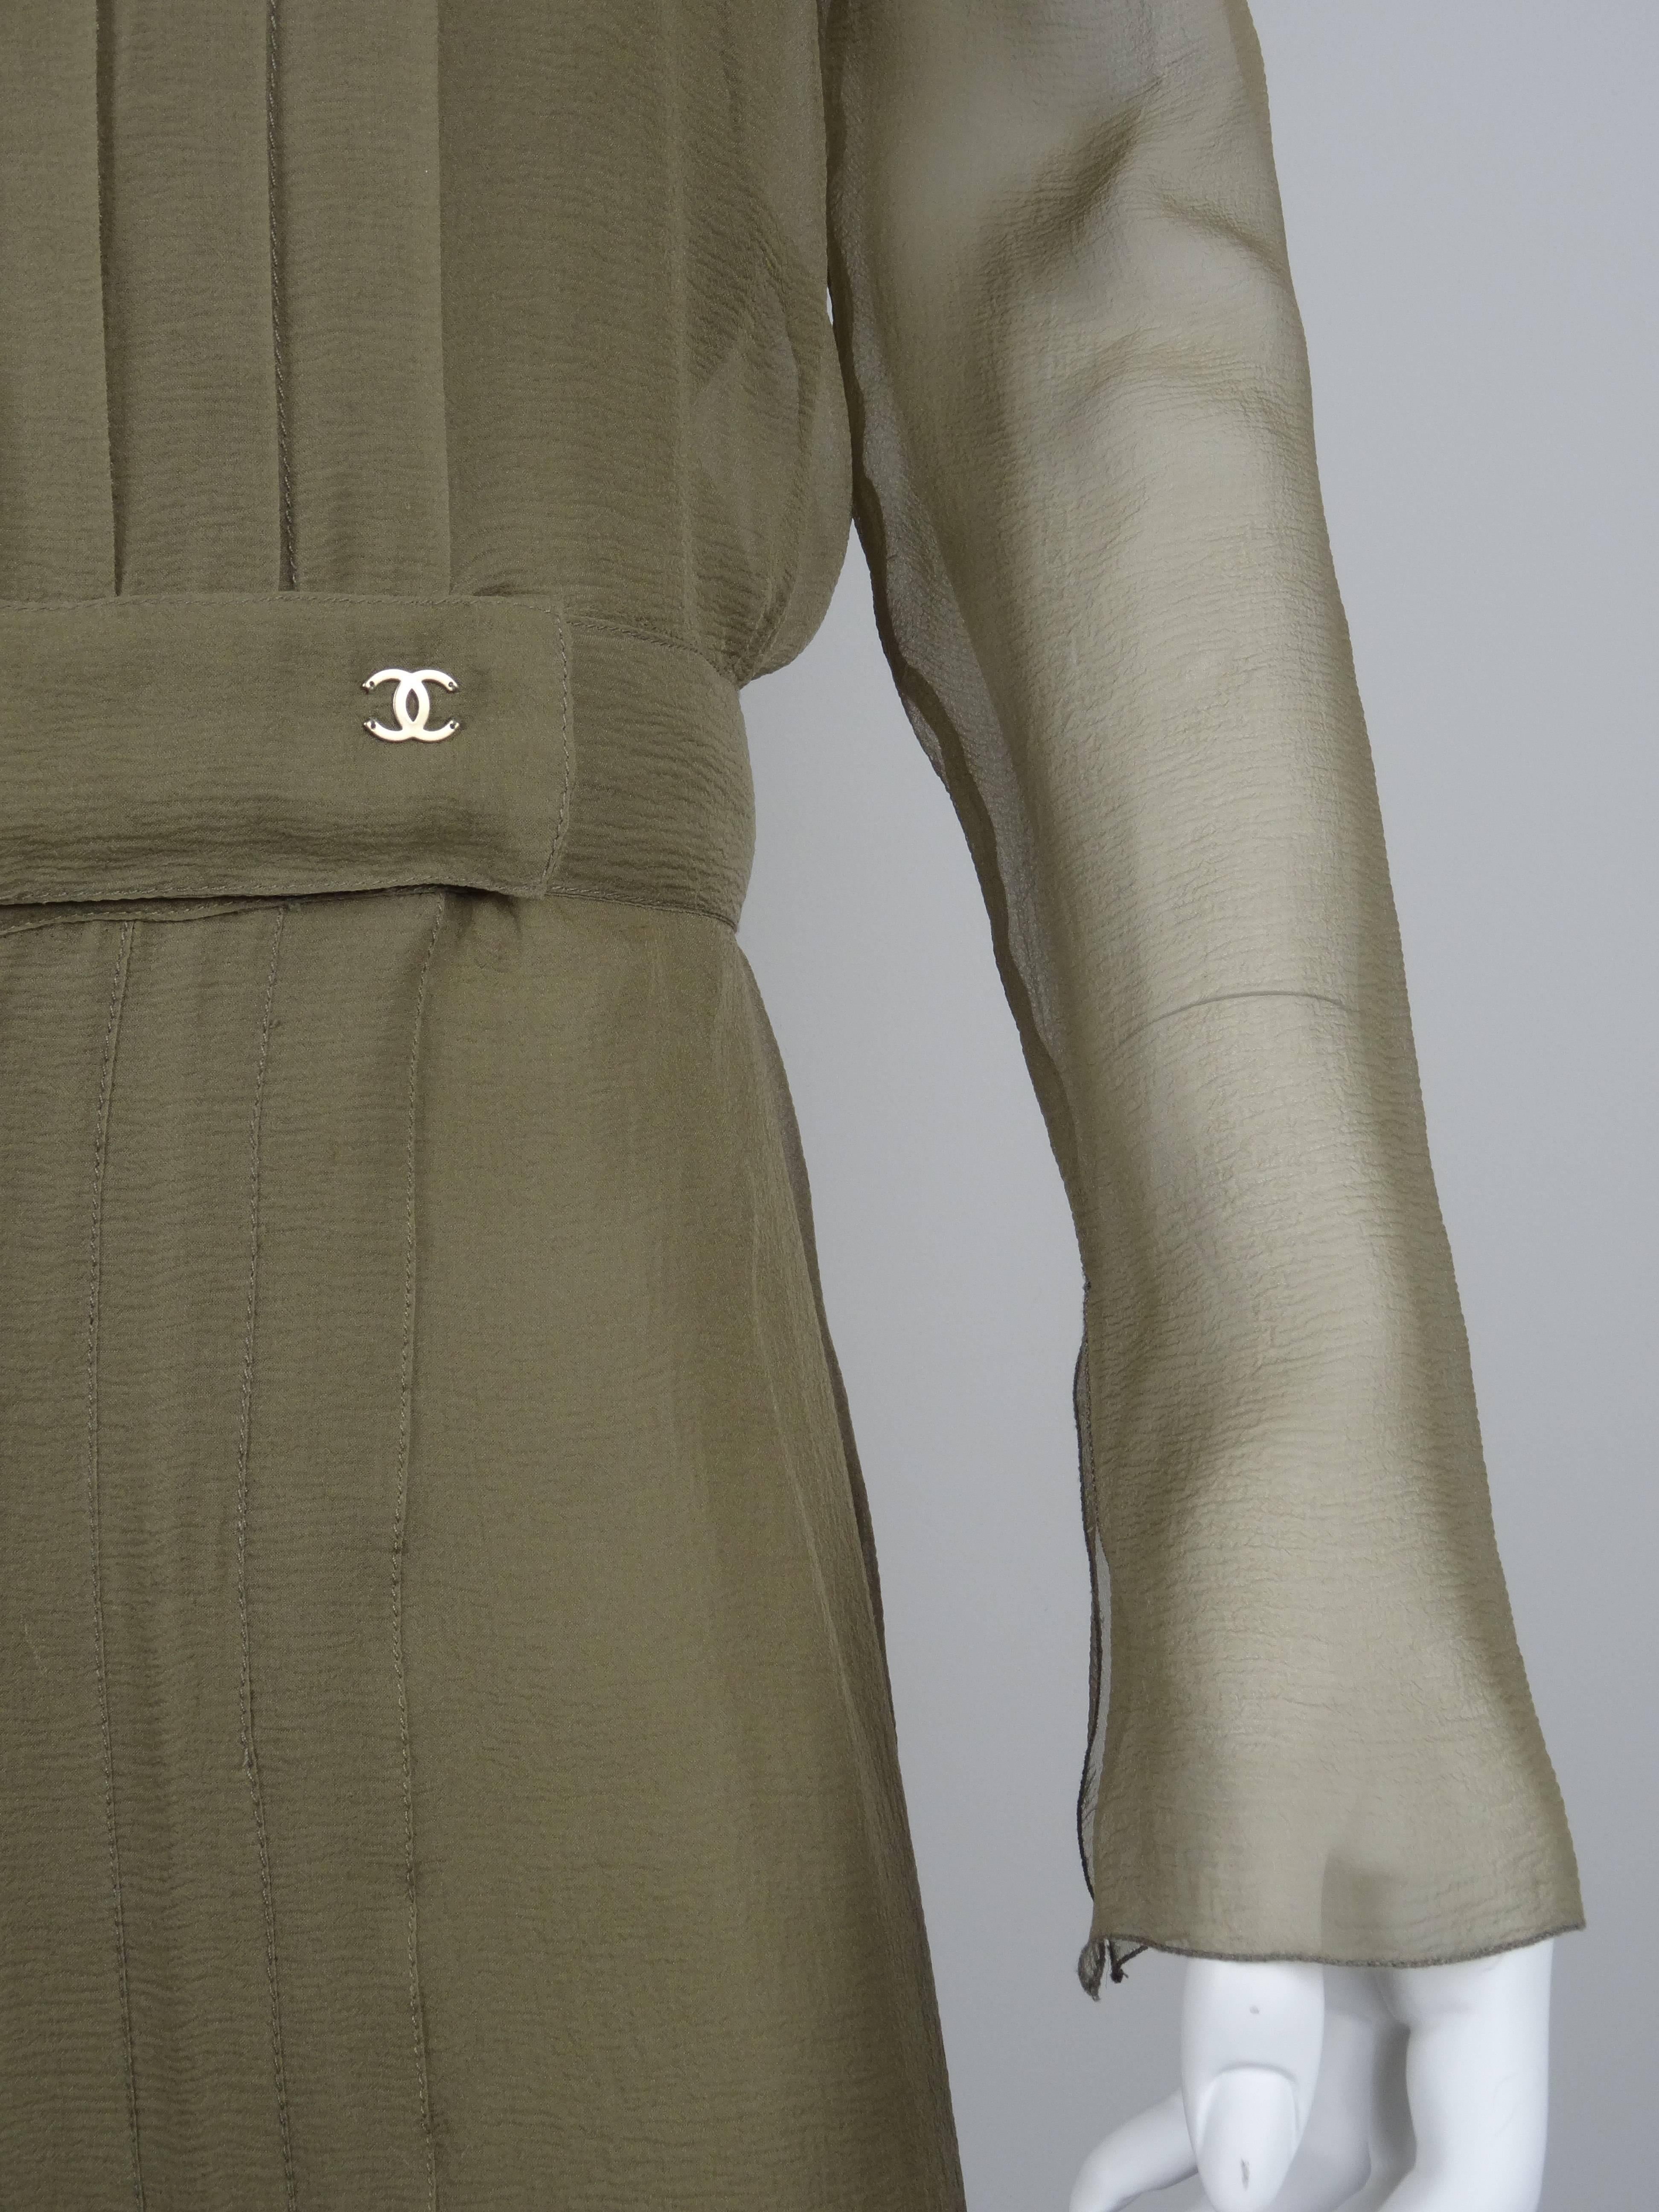 Chanel 2004A Taupe 1920s Style Pleated Sheer Silk 3/4 Length Dress With Bow FR38 For Sale 1